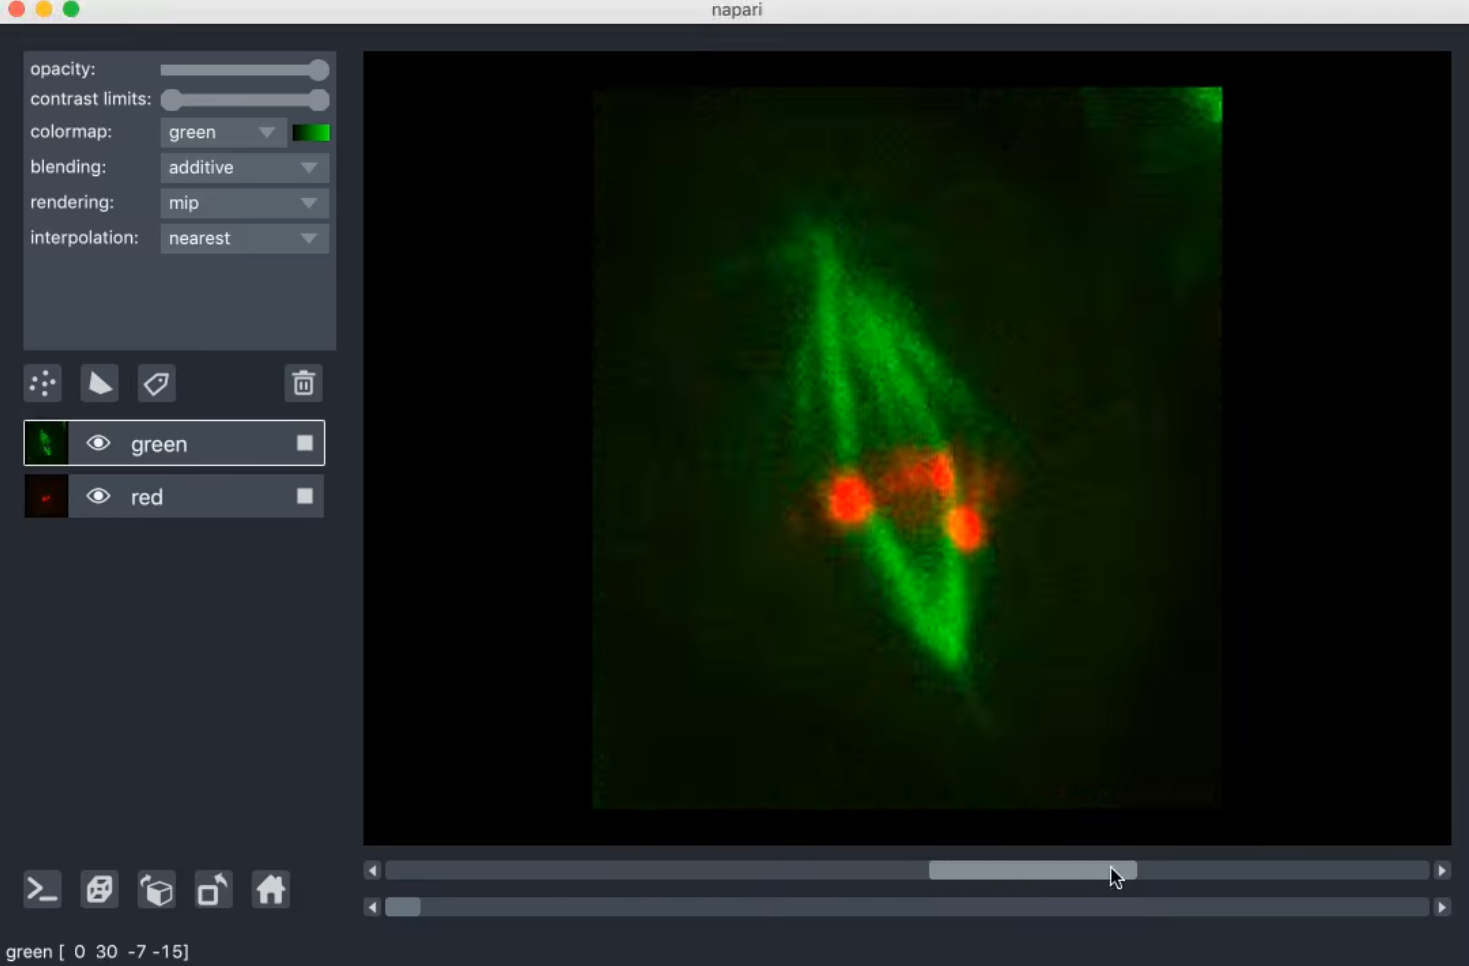 napari viewer with an image of a cell undergoing mitosis. The scroll bar below the canvas controls the timeseries, allowing different stages of mitosis to be visible.